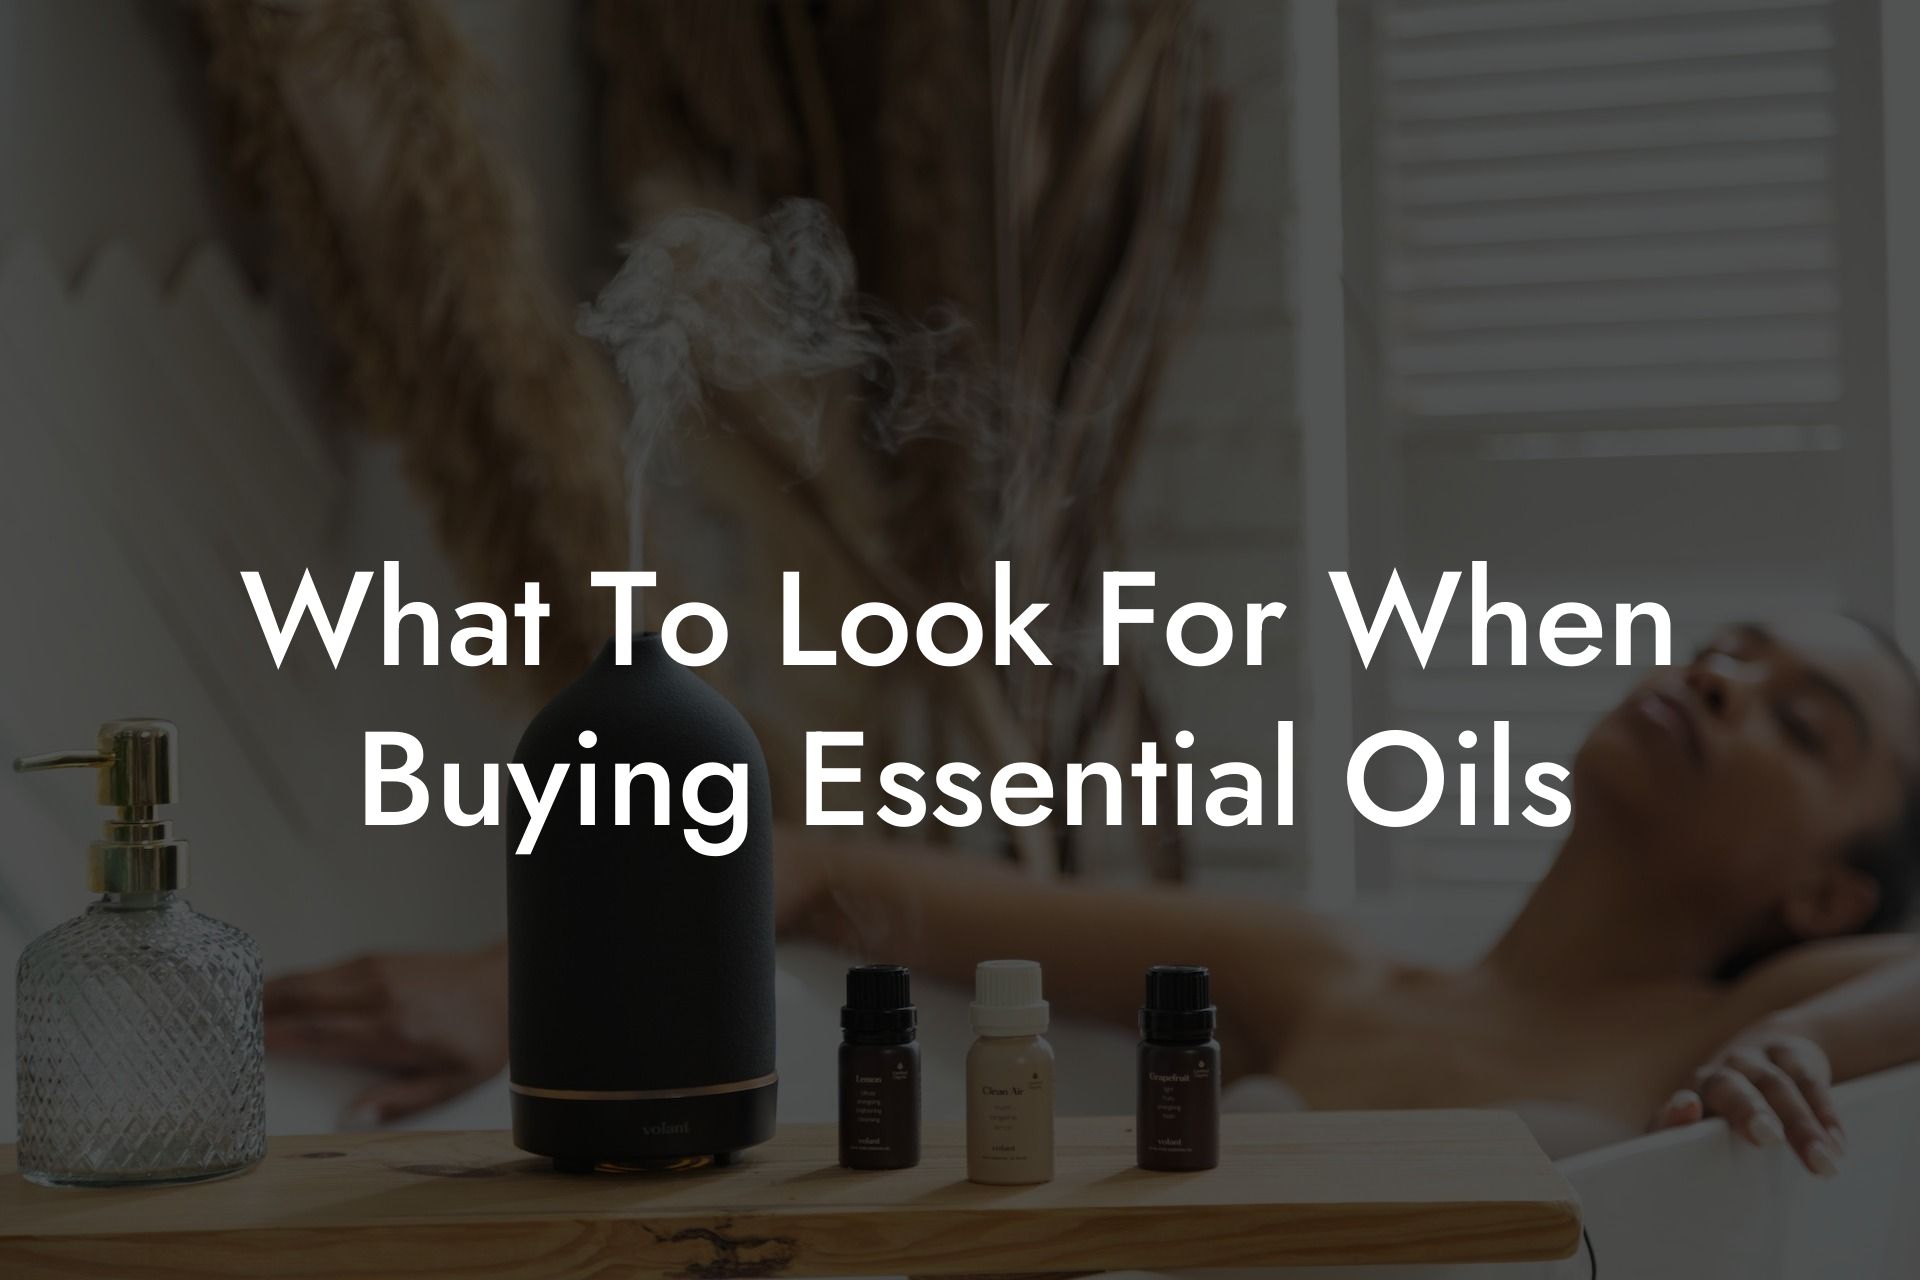 What To Look For When Buying Essential Oils